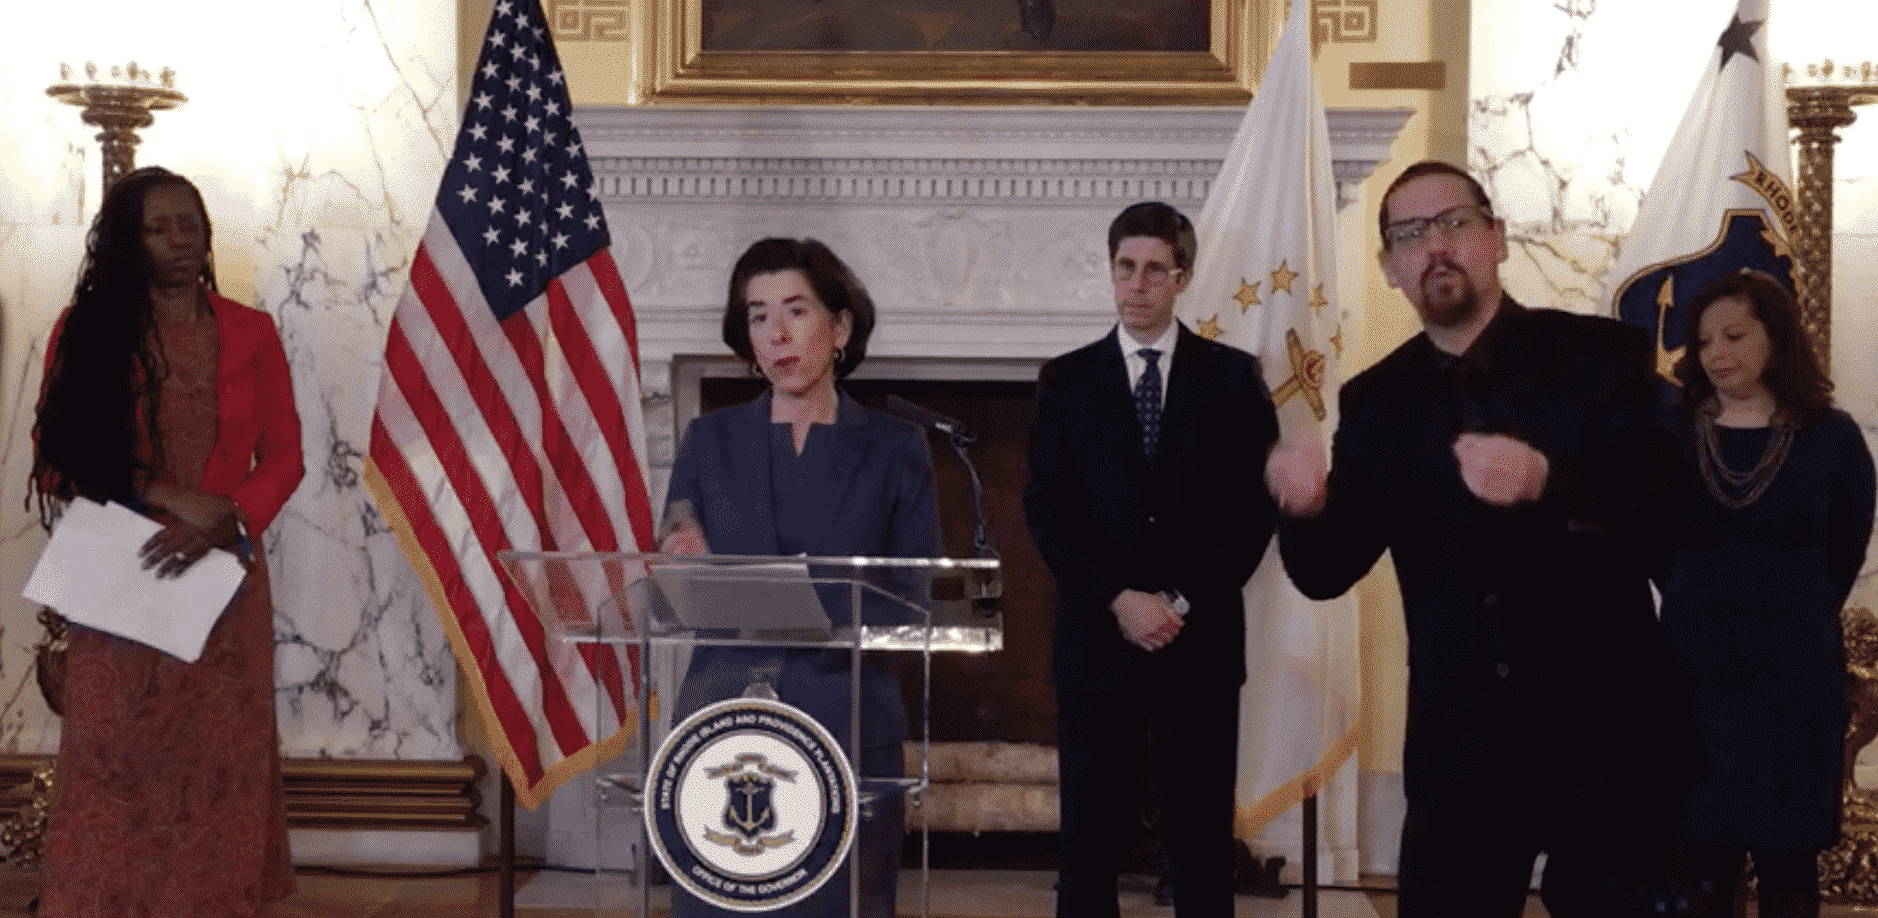 Gov. Gina Raimondo held a press conference March 30, announcing a fourth COVID-19 death, saying the state's commerce restrictions will likely last another month.